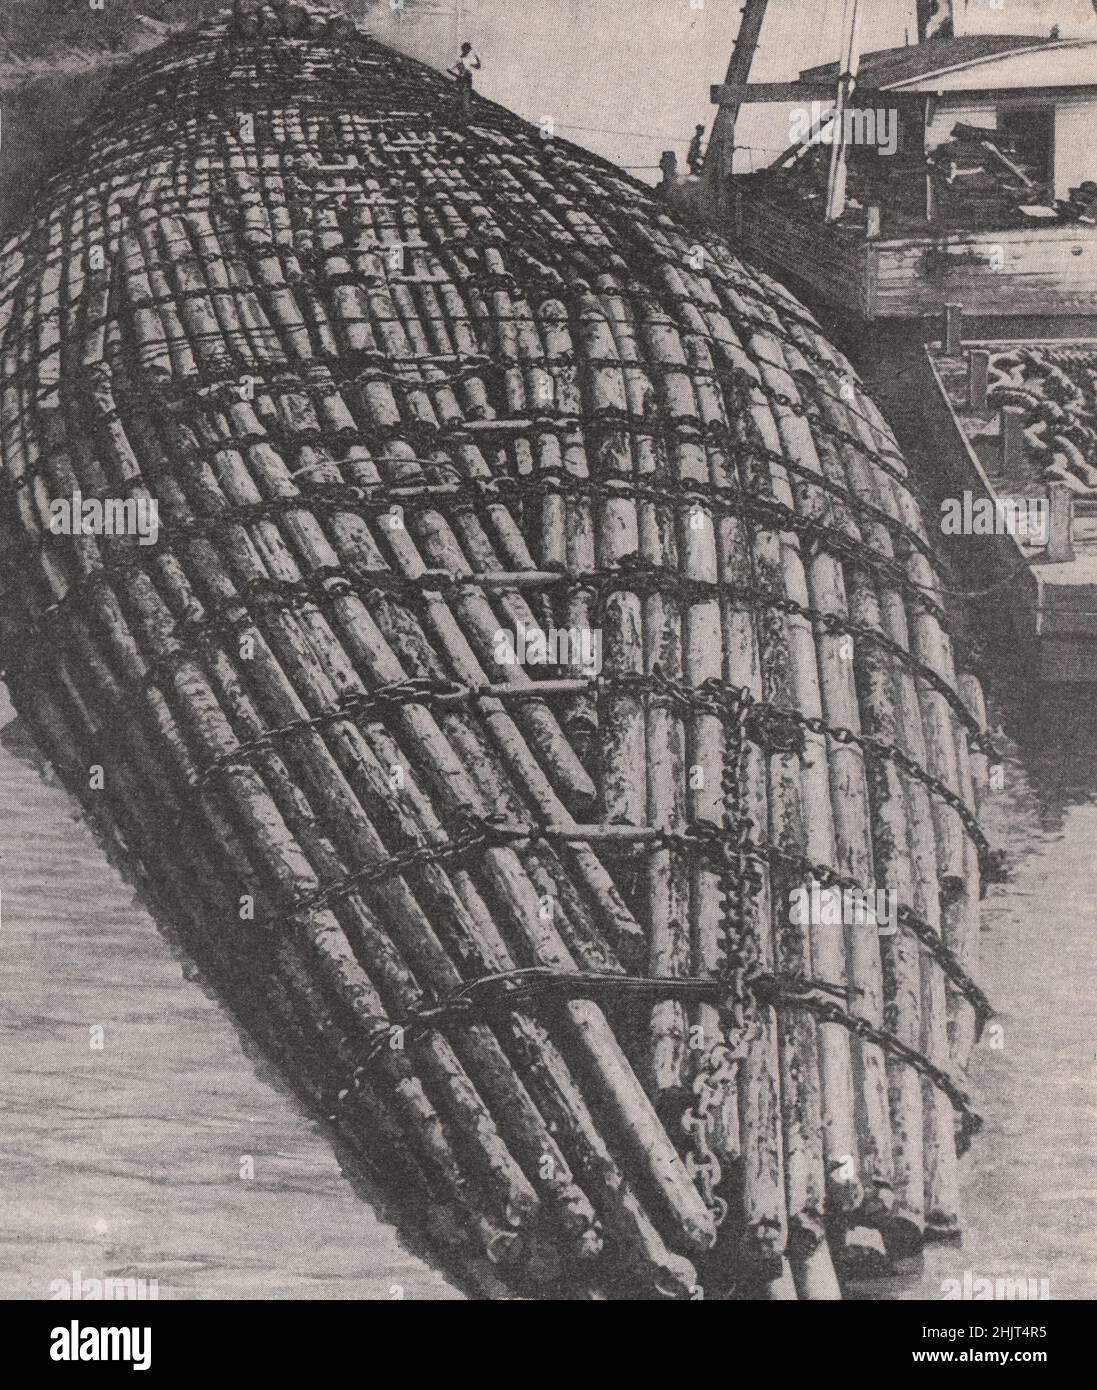 Colossal Raft of Chained Logs on the Columbia River. Pacific Northwest. United States (1923) Stock Photo